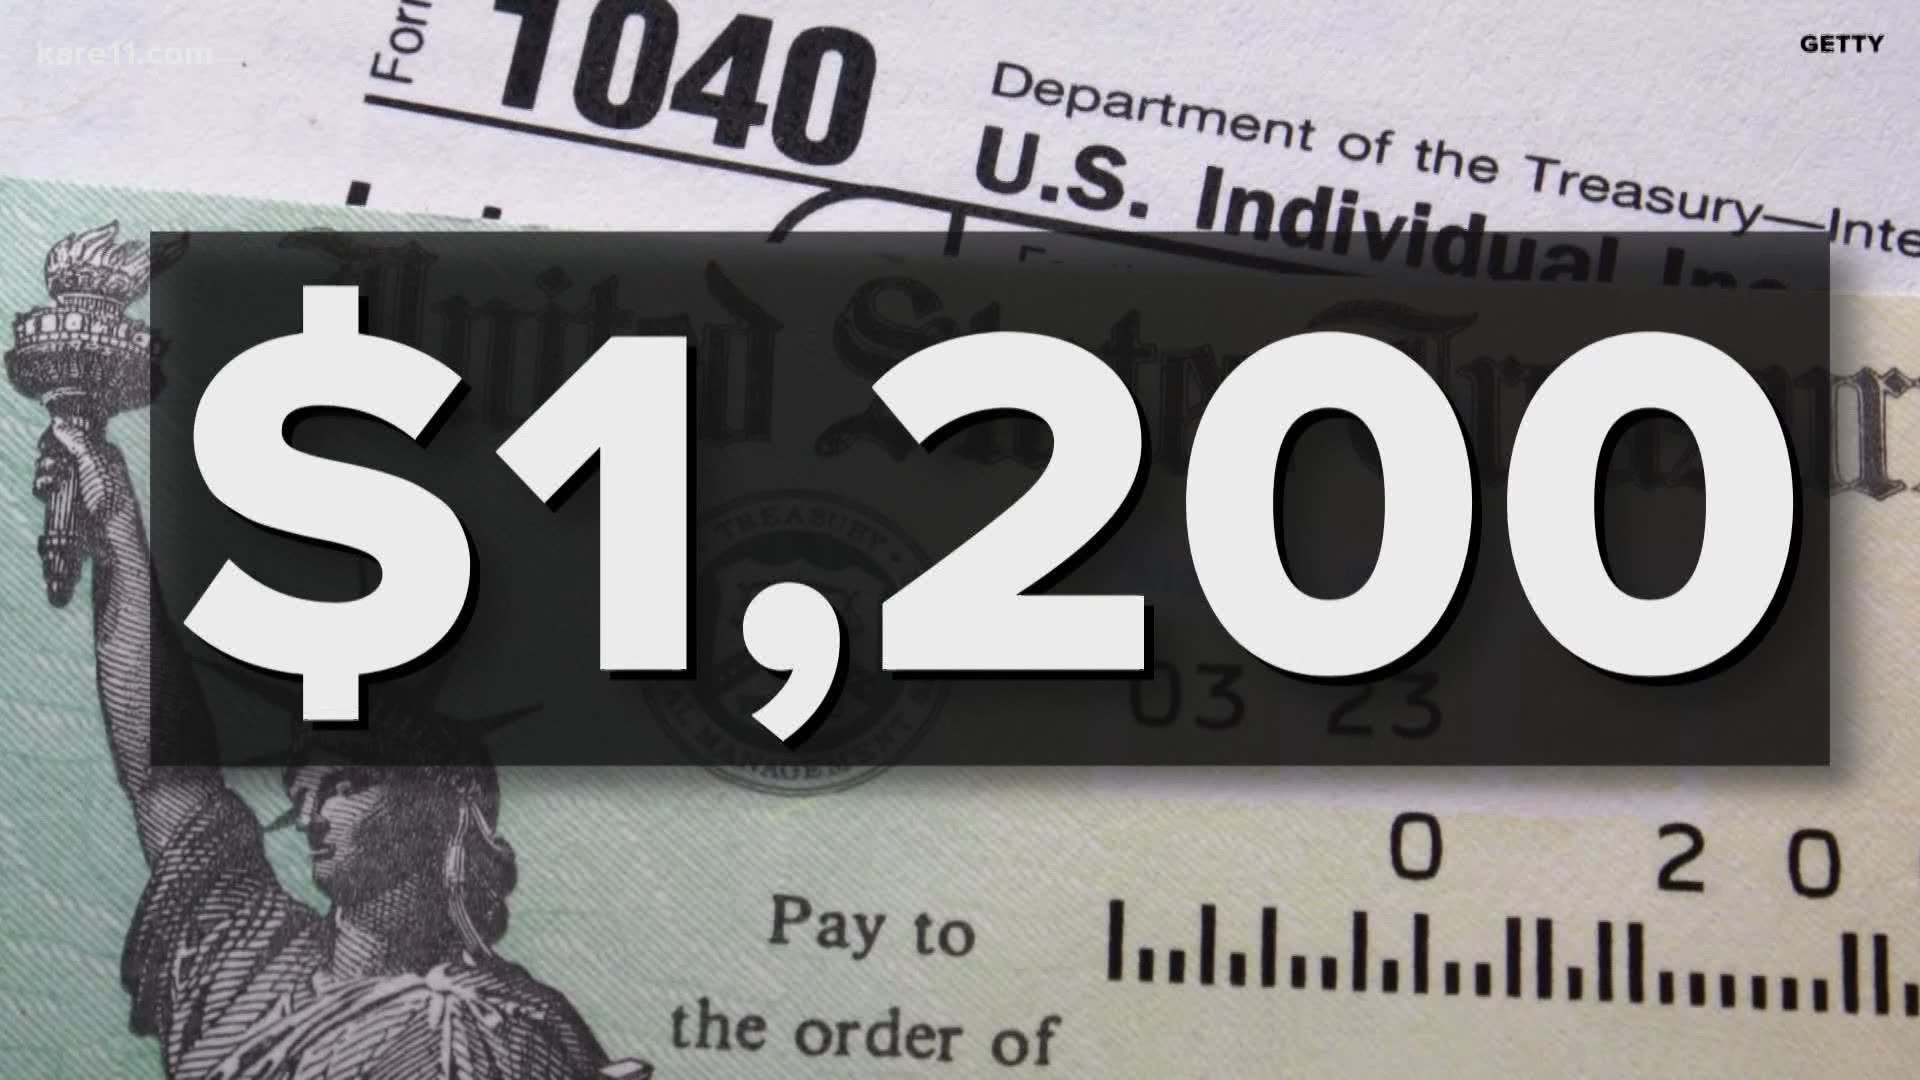 The IRS sent out a new batch of $500 dependent credits on August 5th and reopened its registration site to get more parents paid.